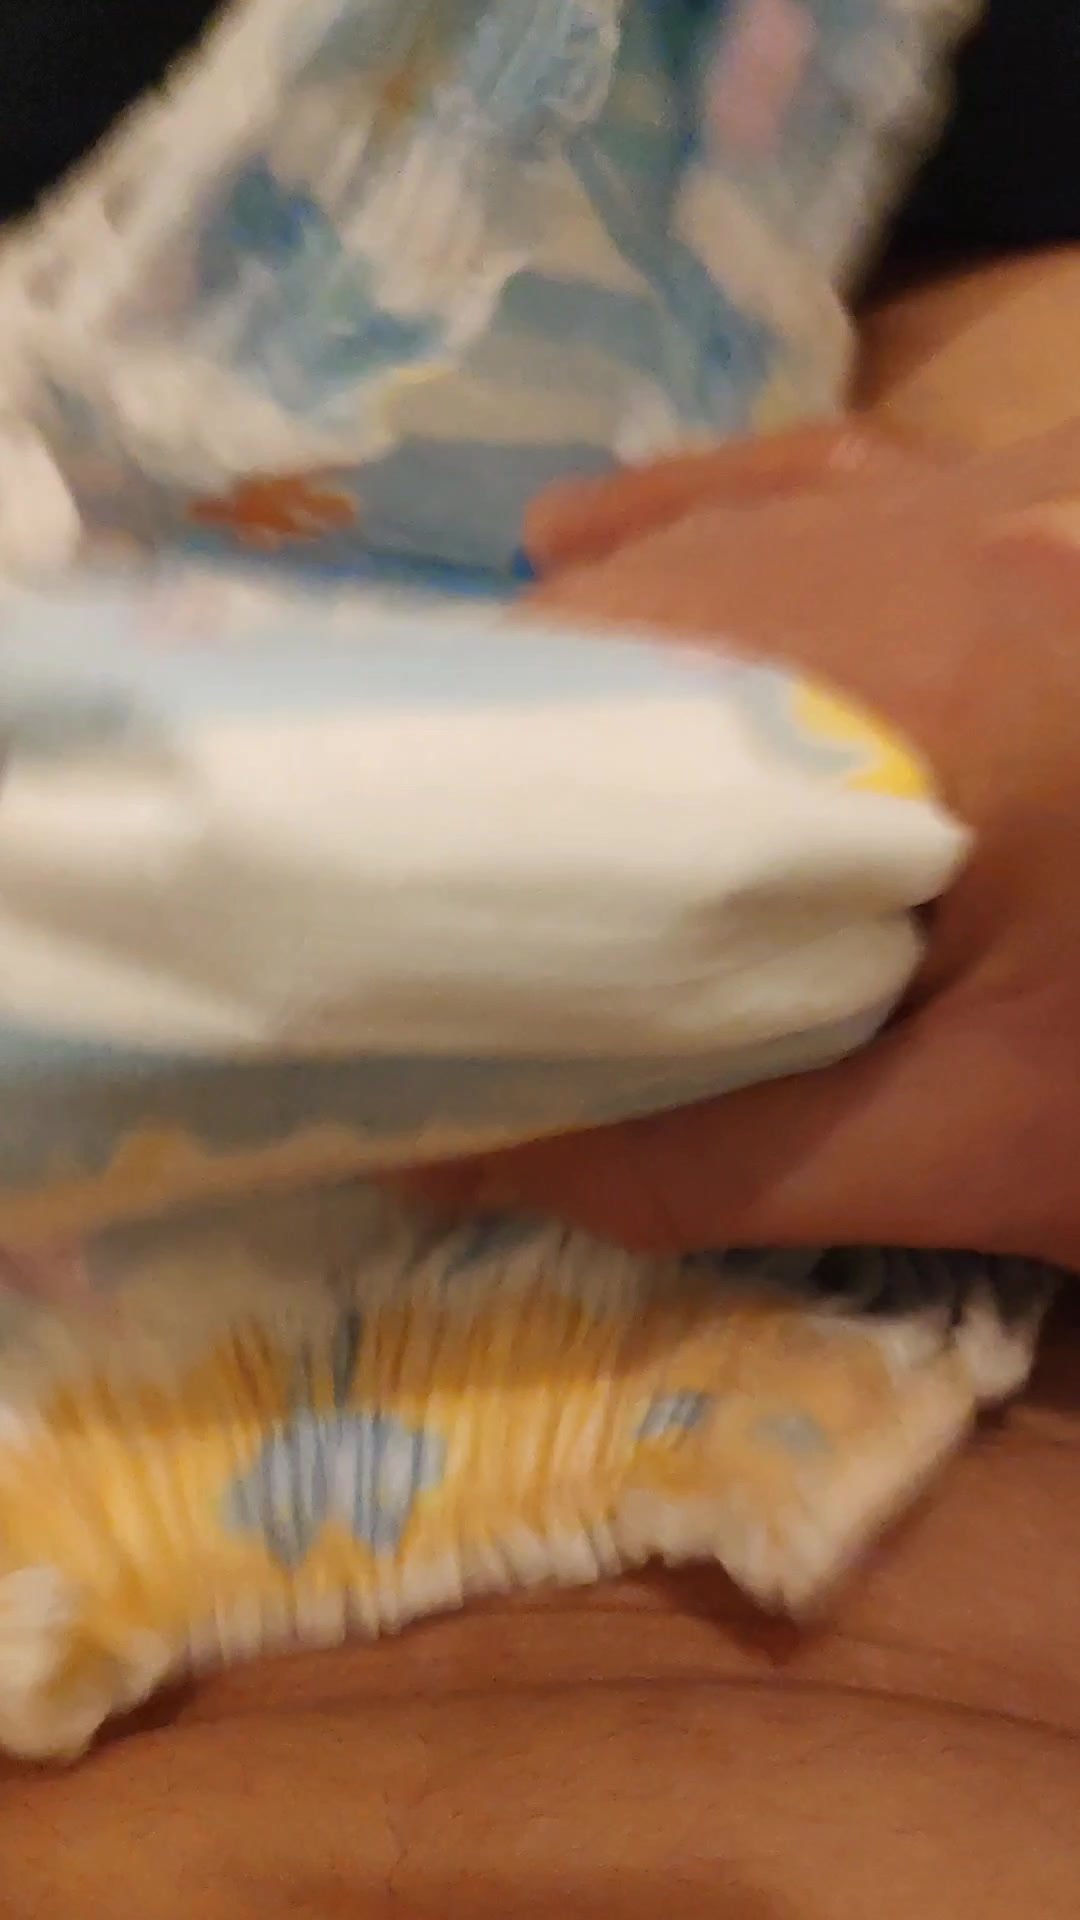 Trying to cum in this Super cute Baby shark diaper